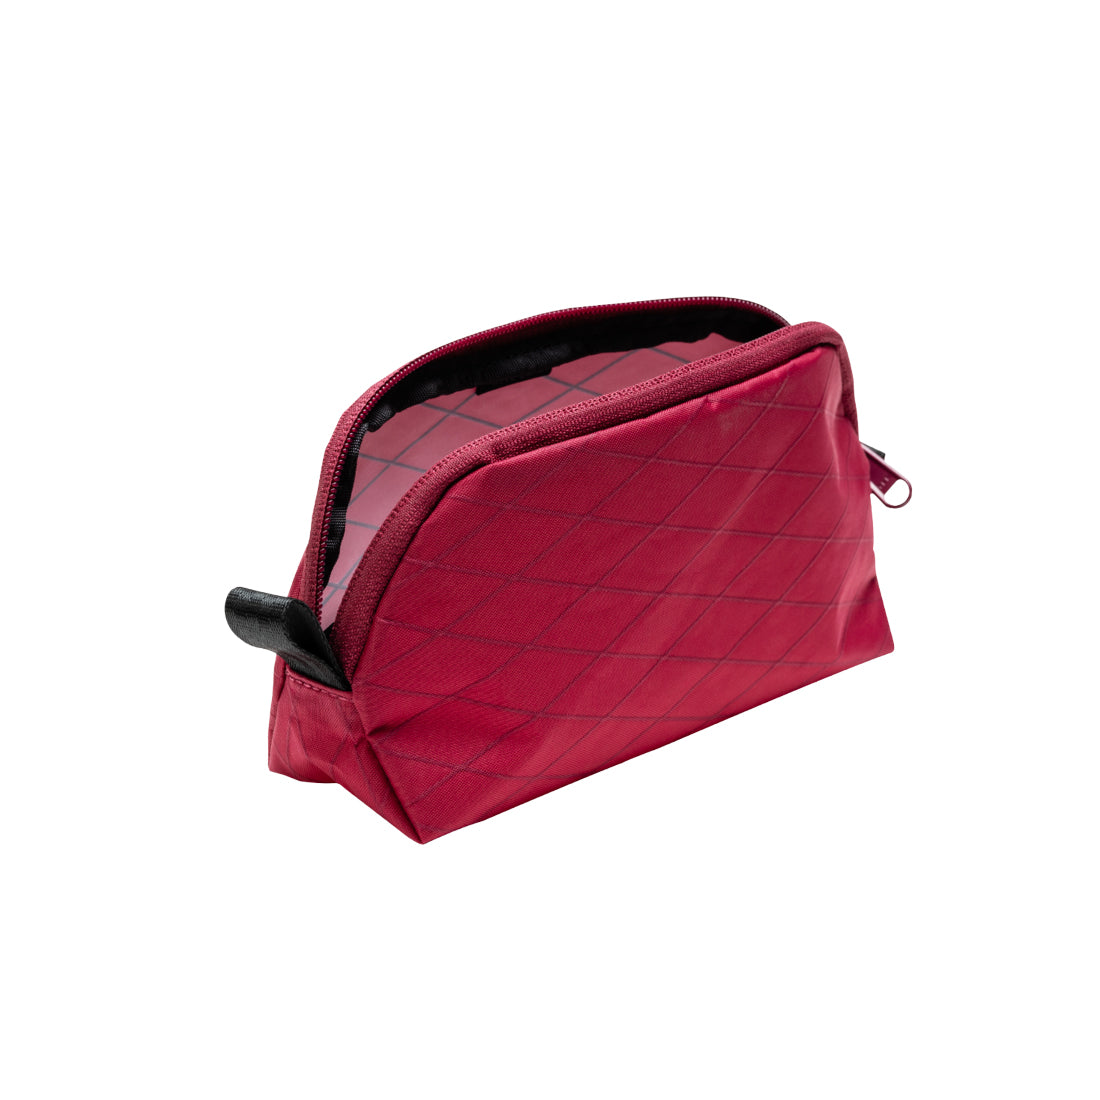 Able Carry : The Daily Stash Pouch : XPAC Port Red